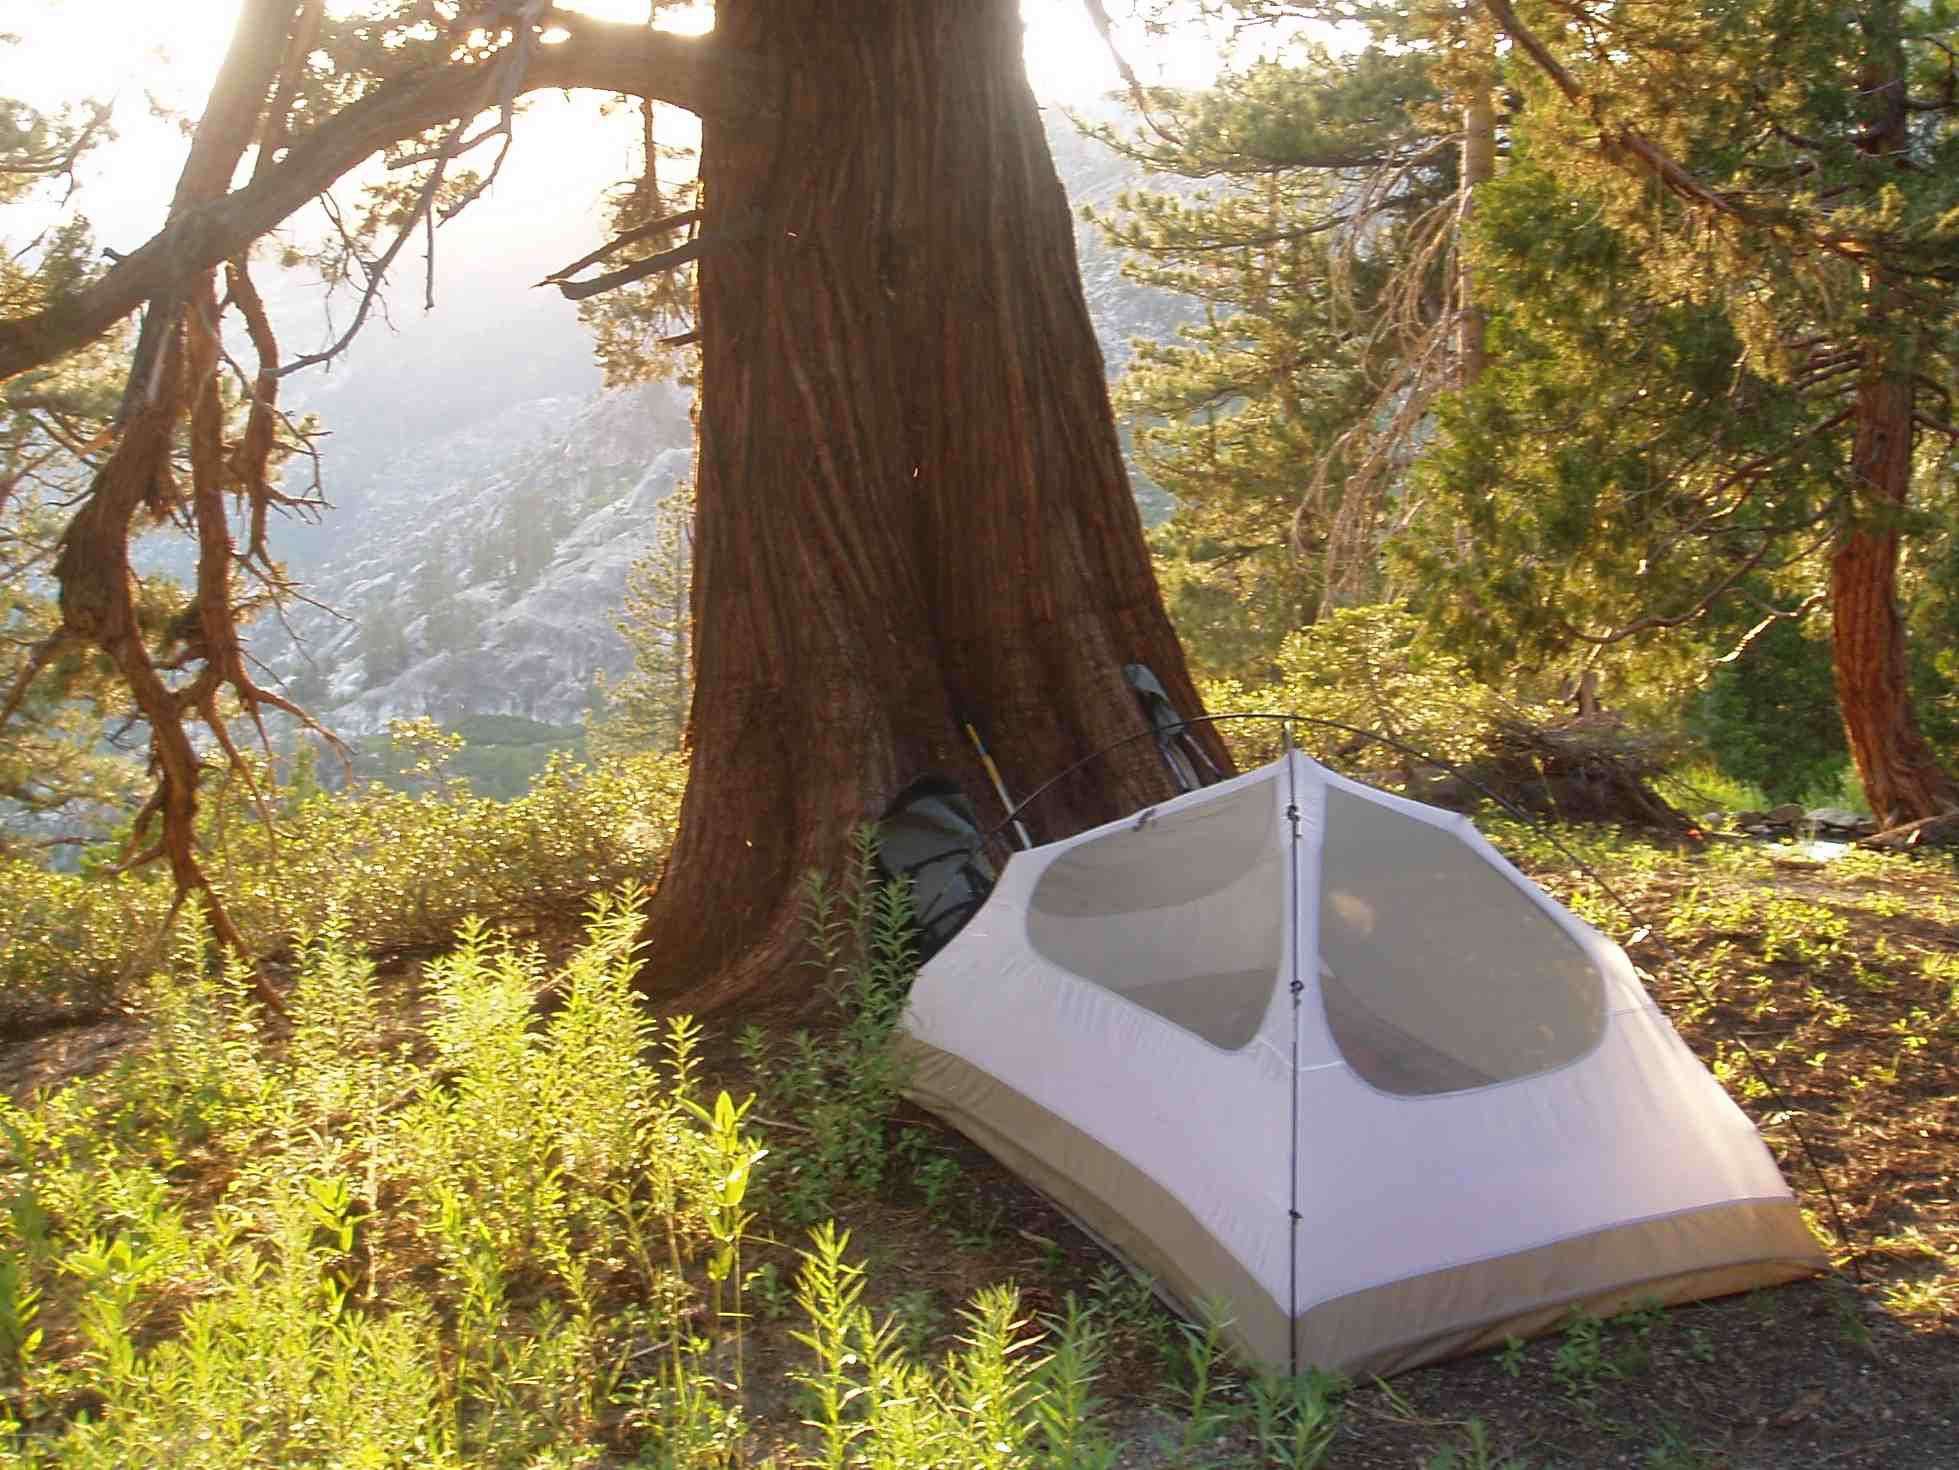 Dispersed Camping in the U.S. National Forests